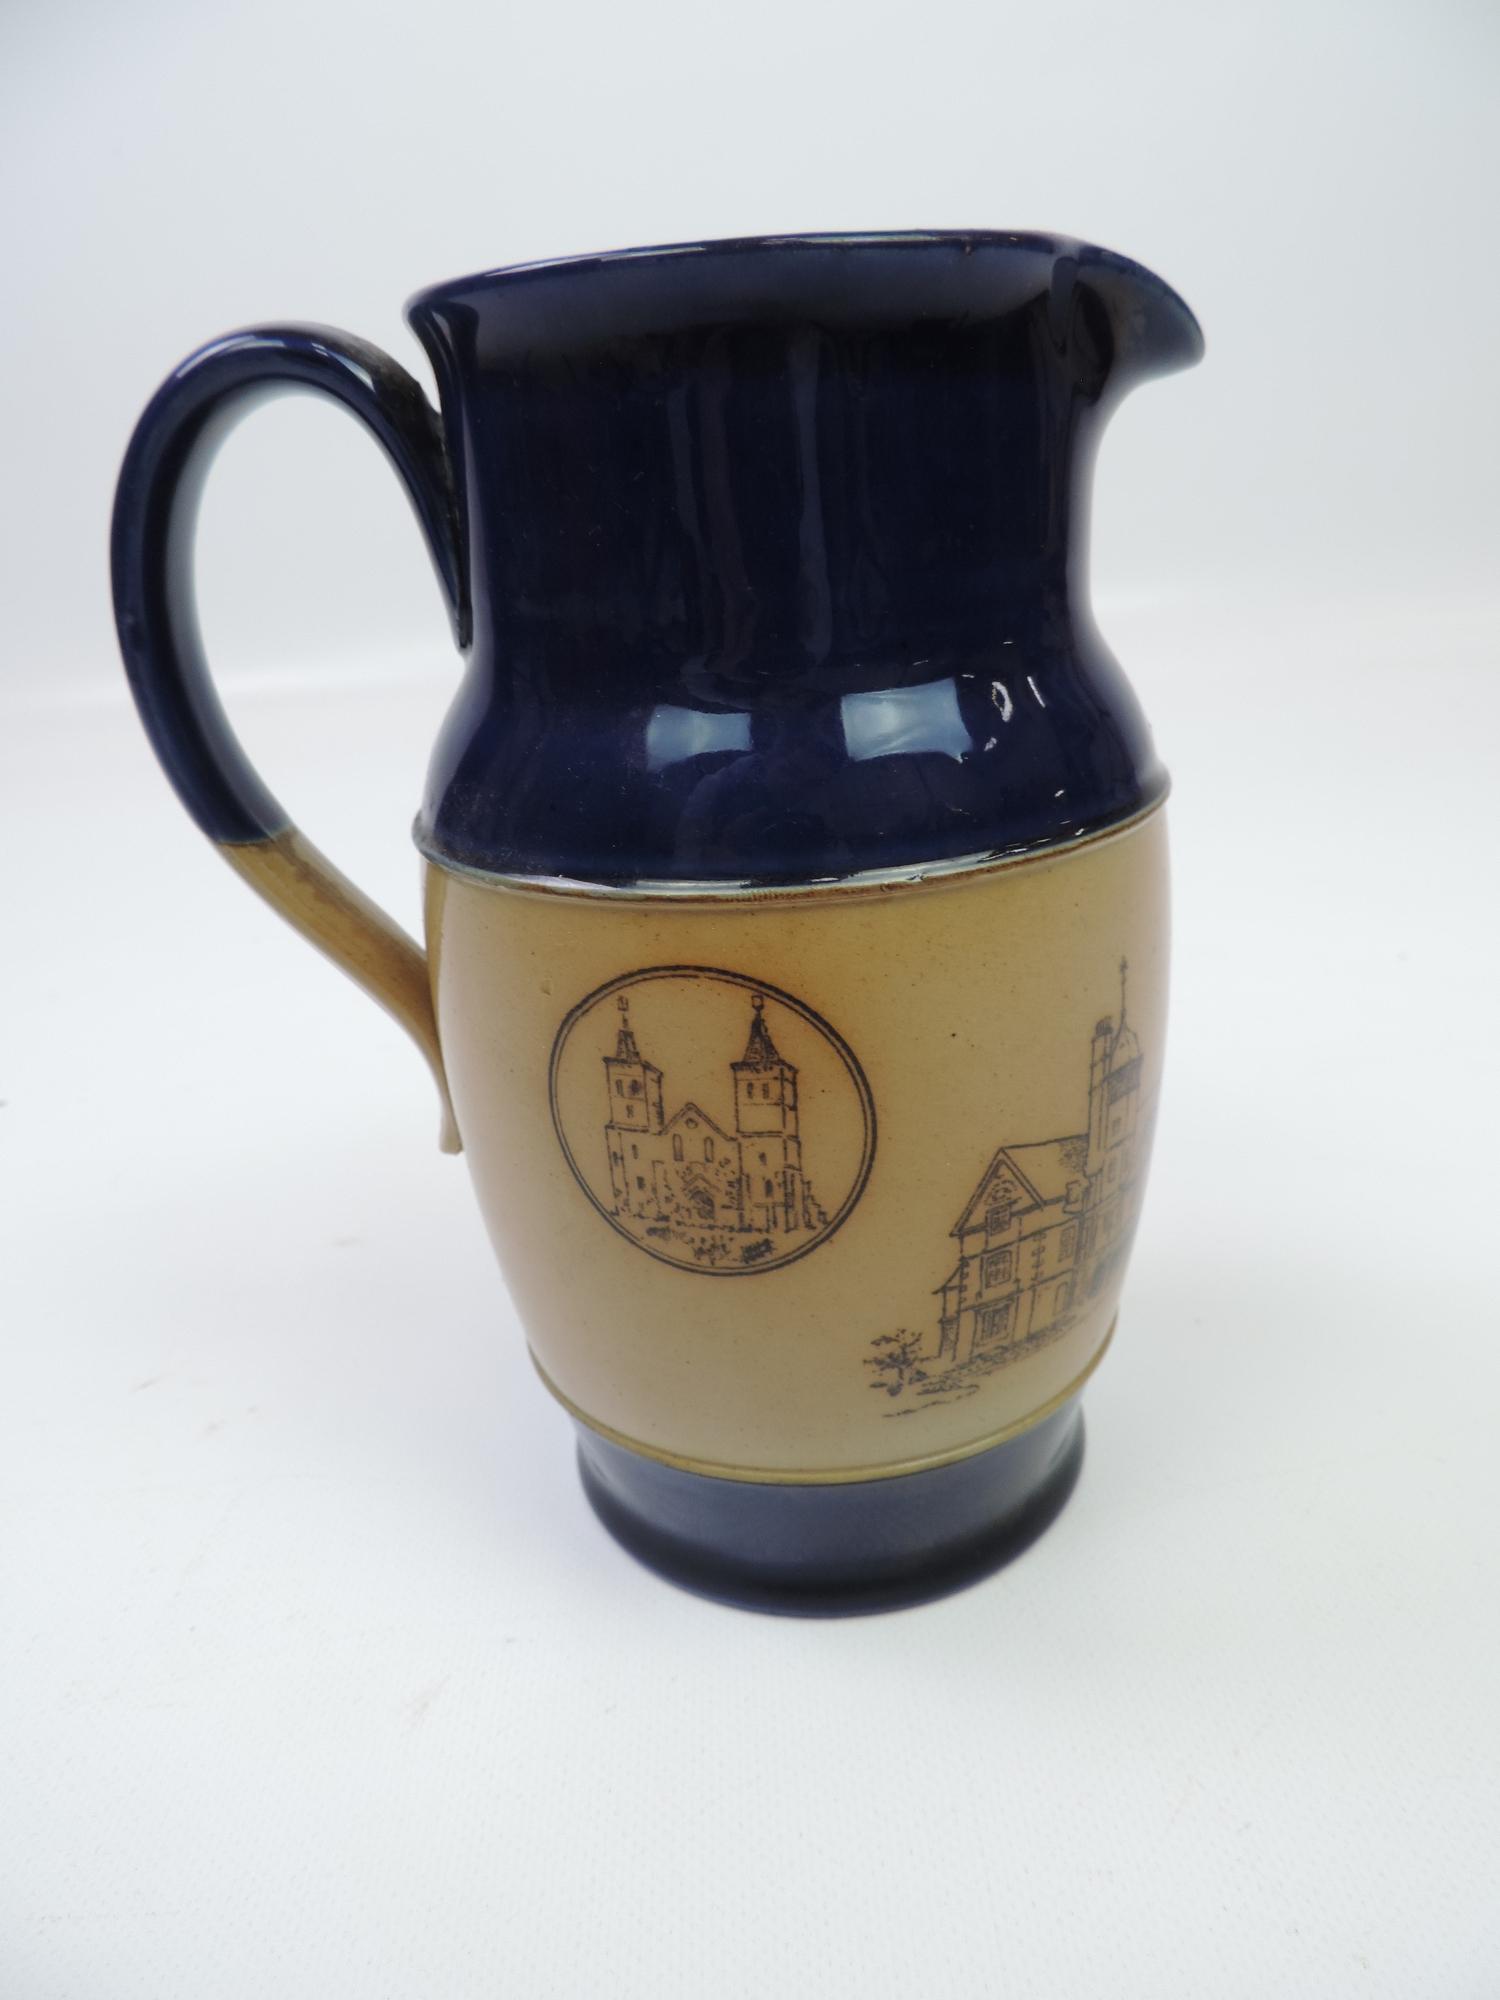 Royal Doulton Salt Glaze Stoneware Jug Made for the Railwayman’s Convalescent Home in Herne Bay, - Image 3 of 4